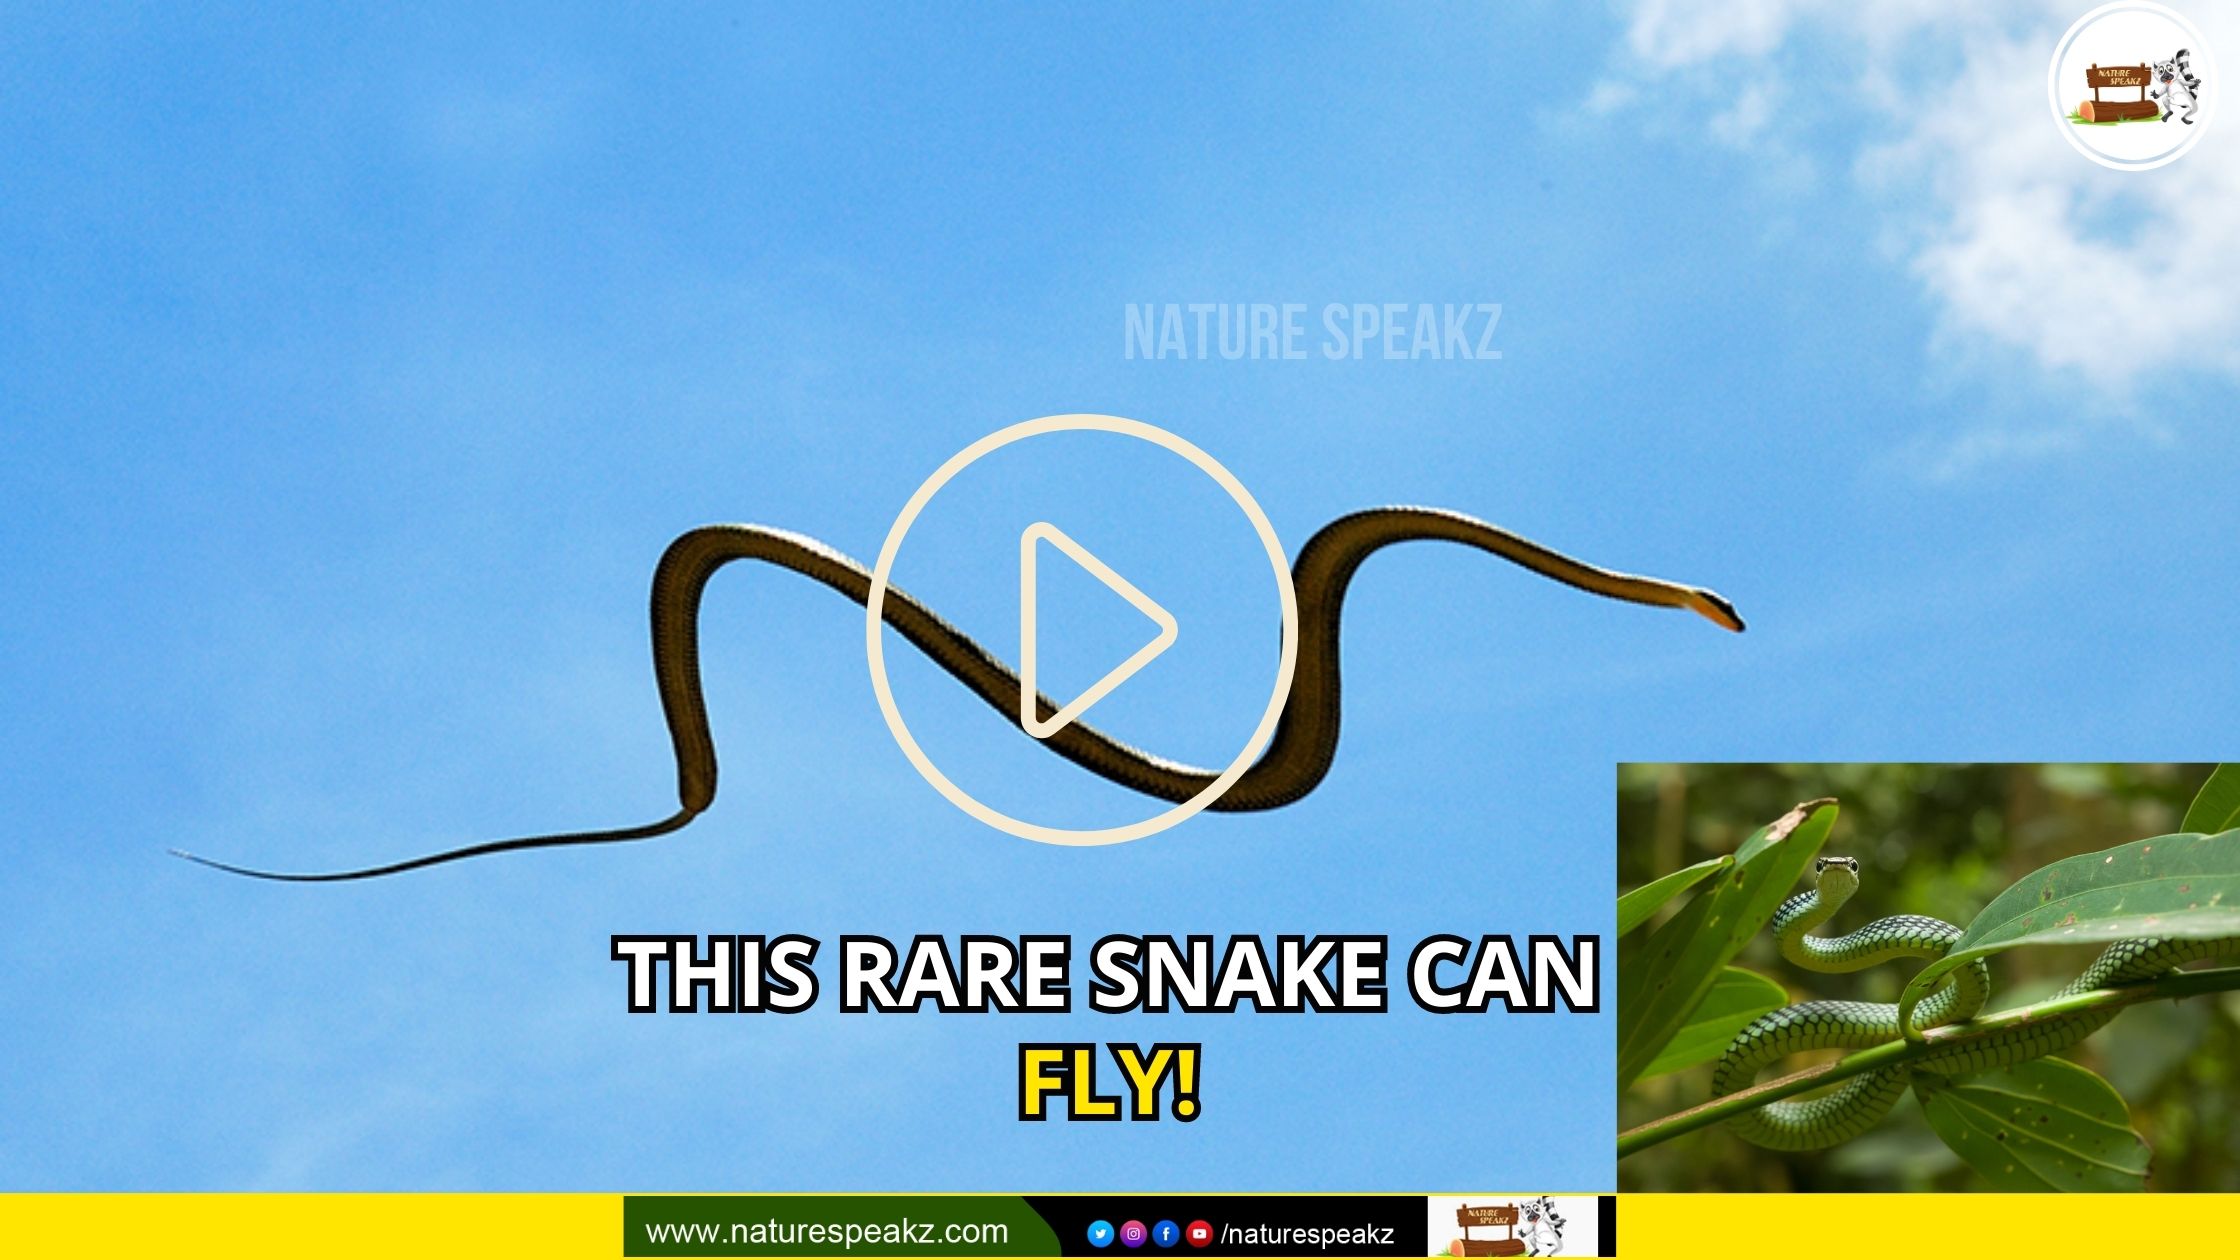 This rare snake can fly!